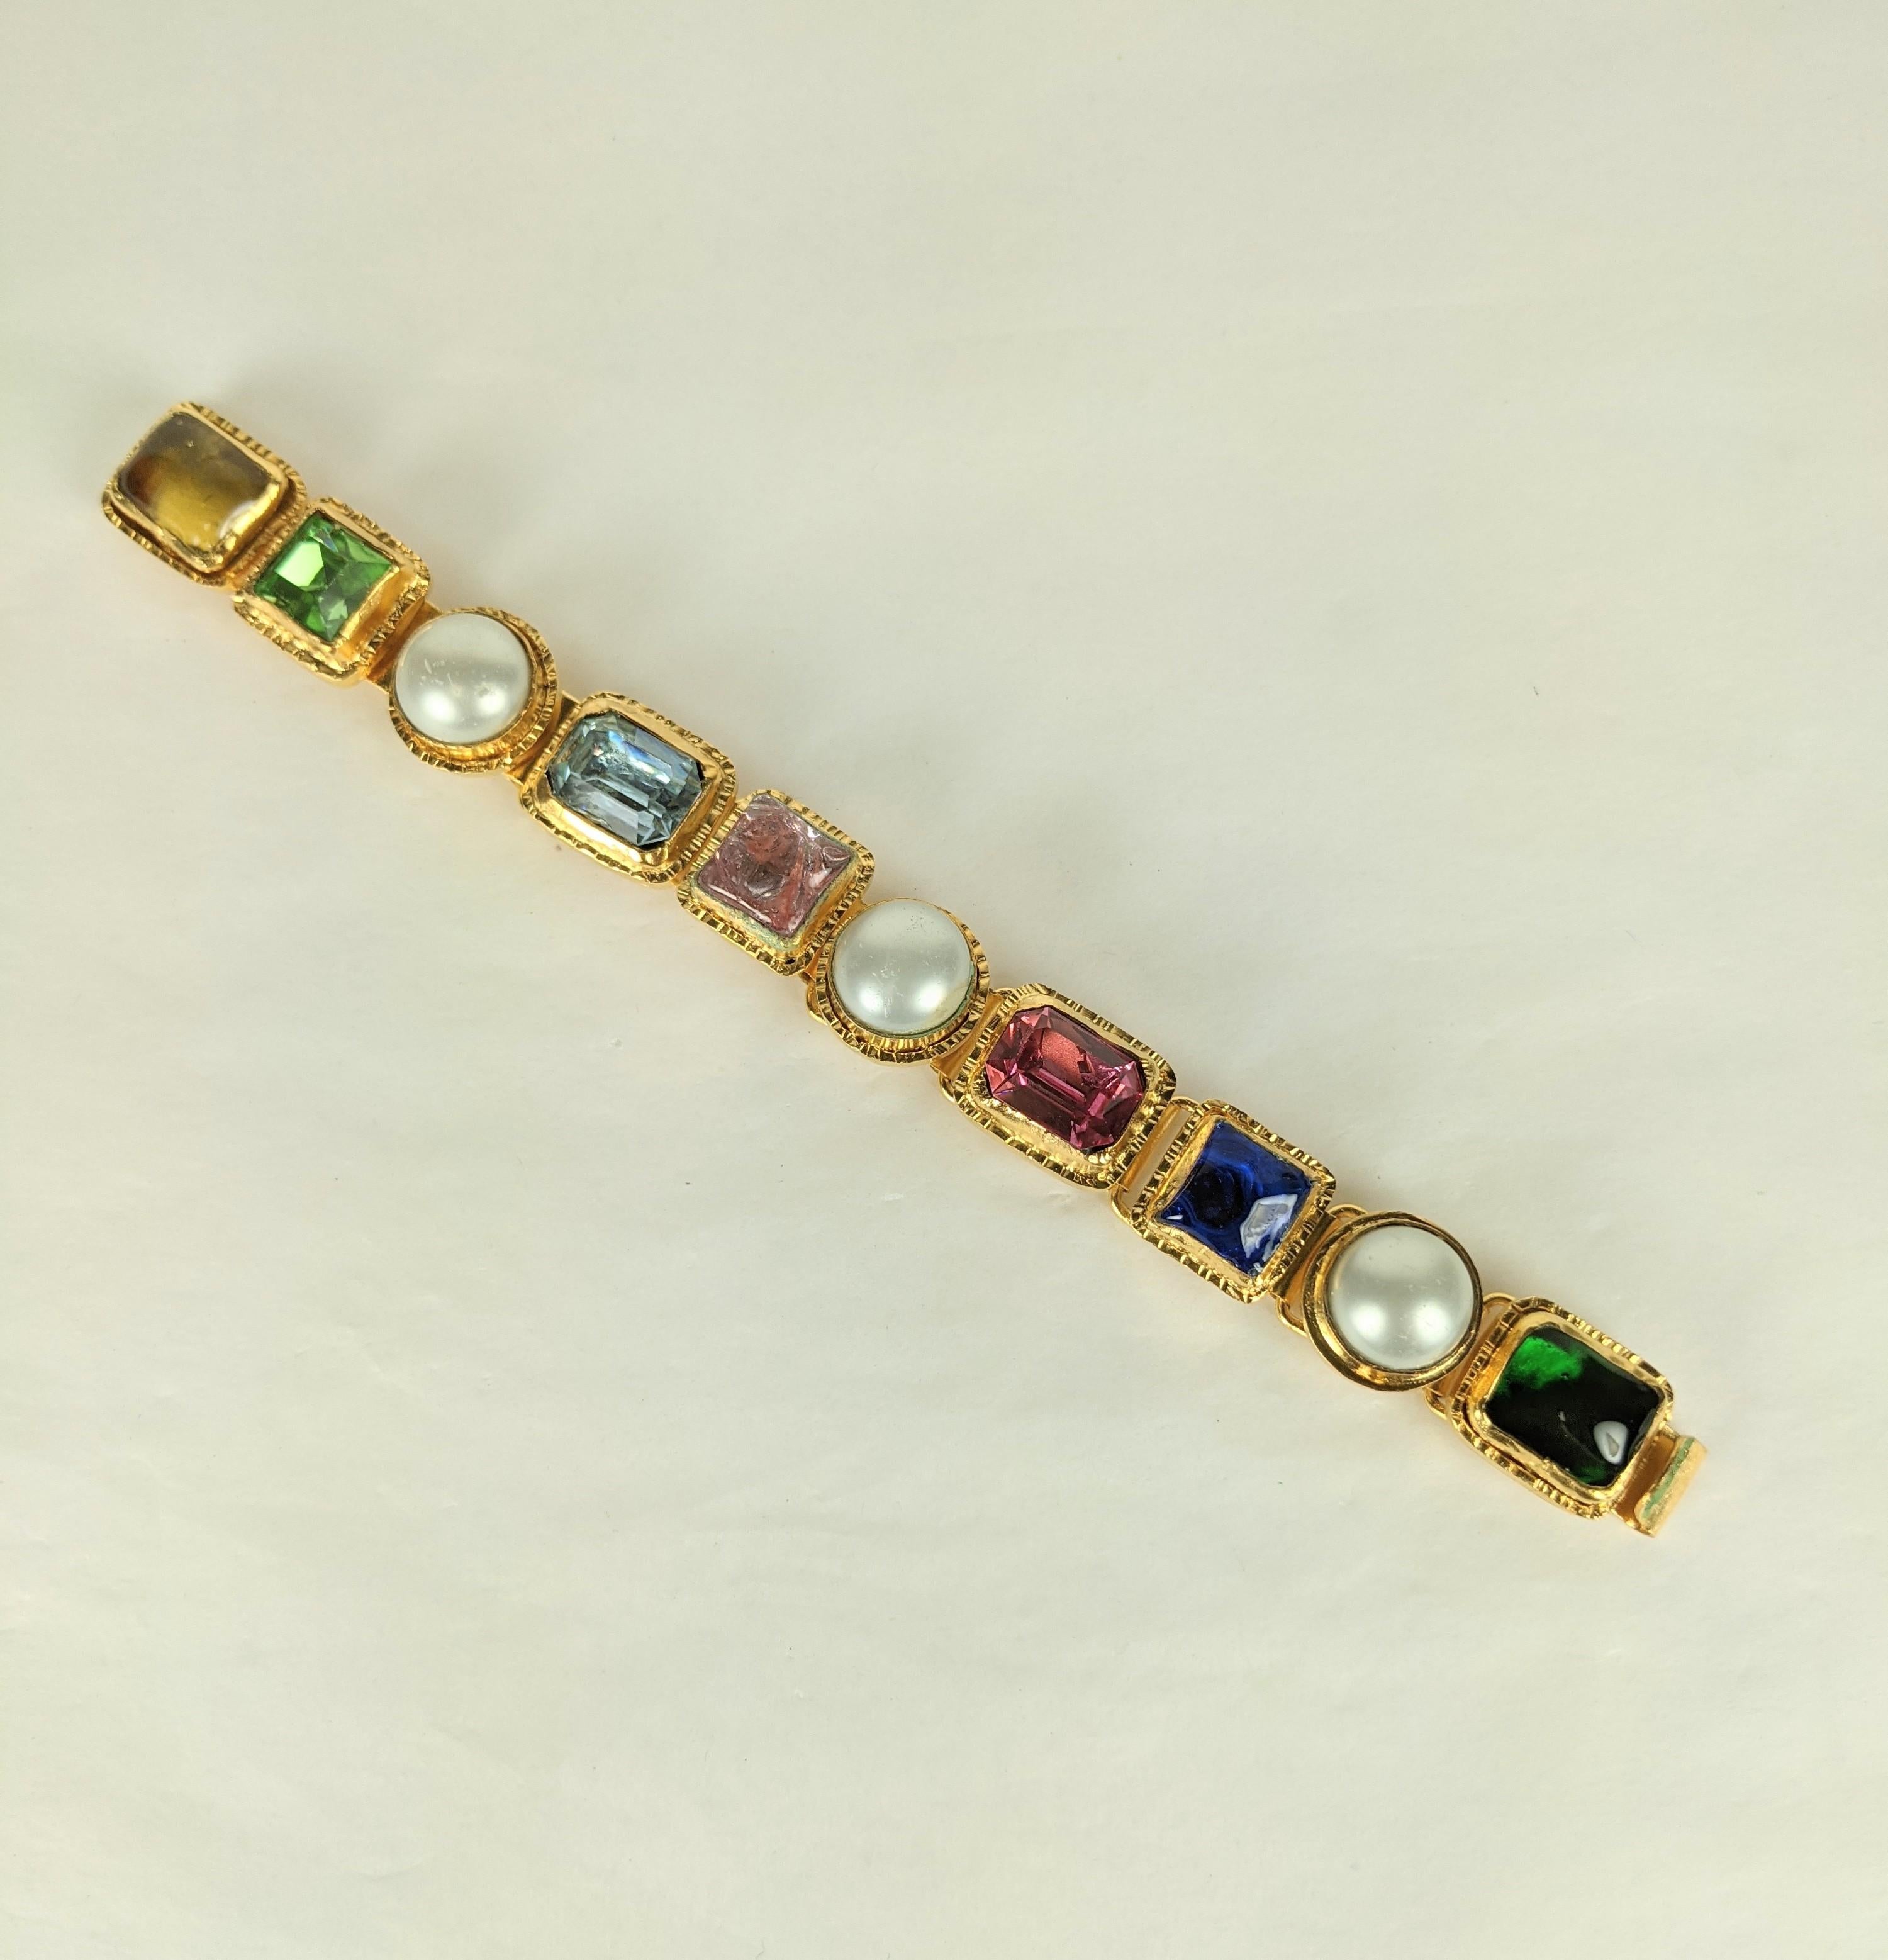 Chanel early Maison Gripoix Renaissance style link bracelet. Composed of flexible multilinks of faux baroque pearl cabocheons, faceted rectangular crystal, and Gripoix  poured glass enamel  square cabocheons. Handmade gilt bronze settings. Marked